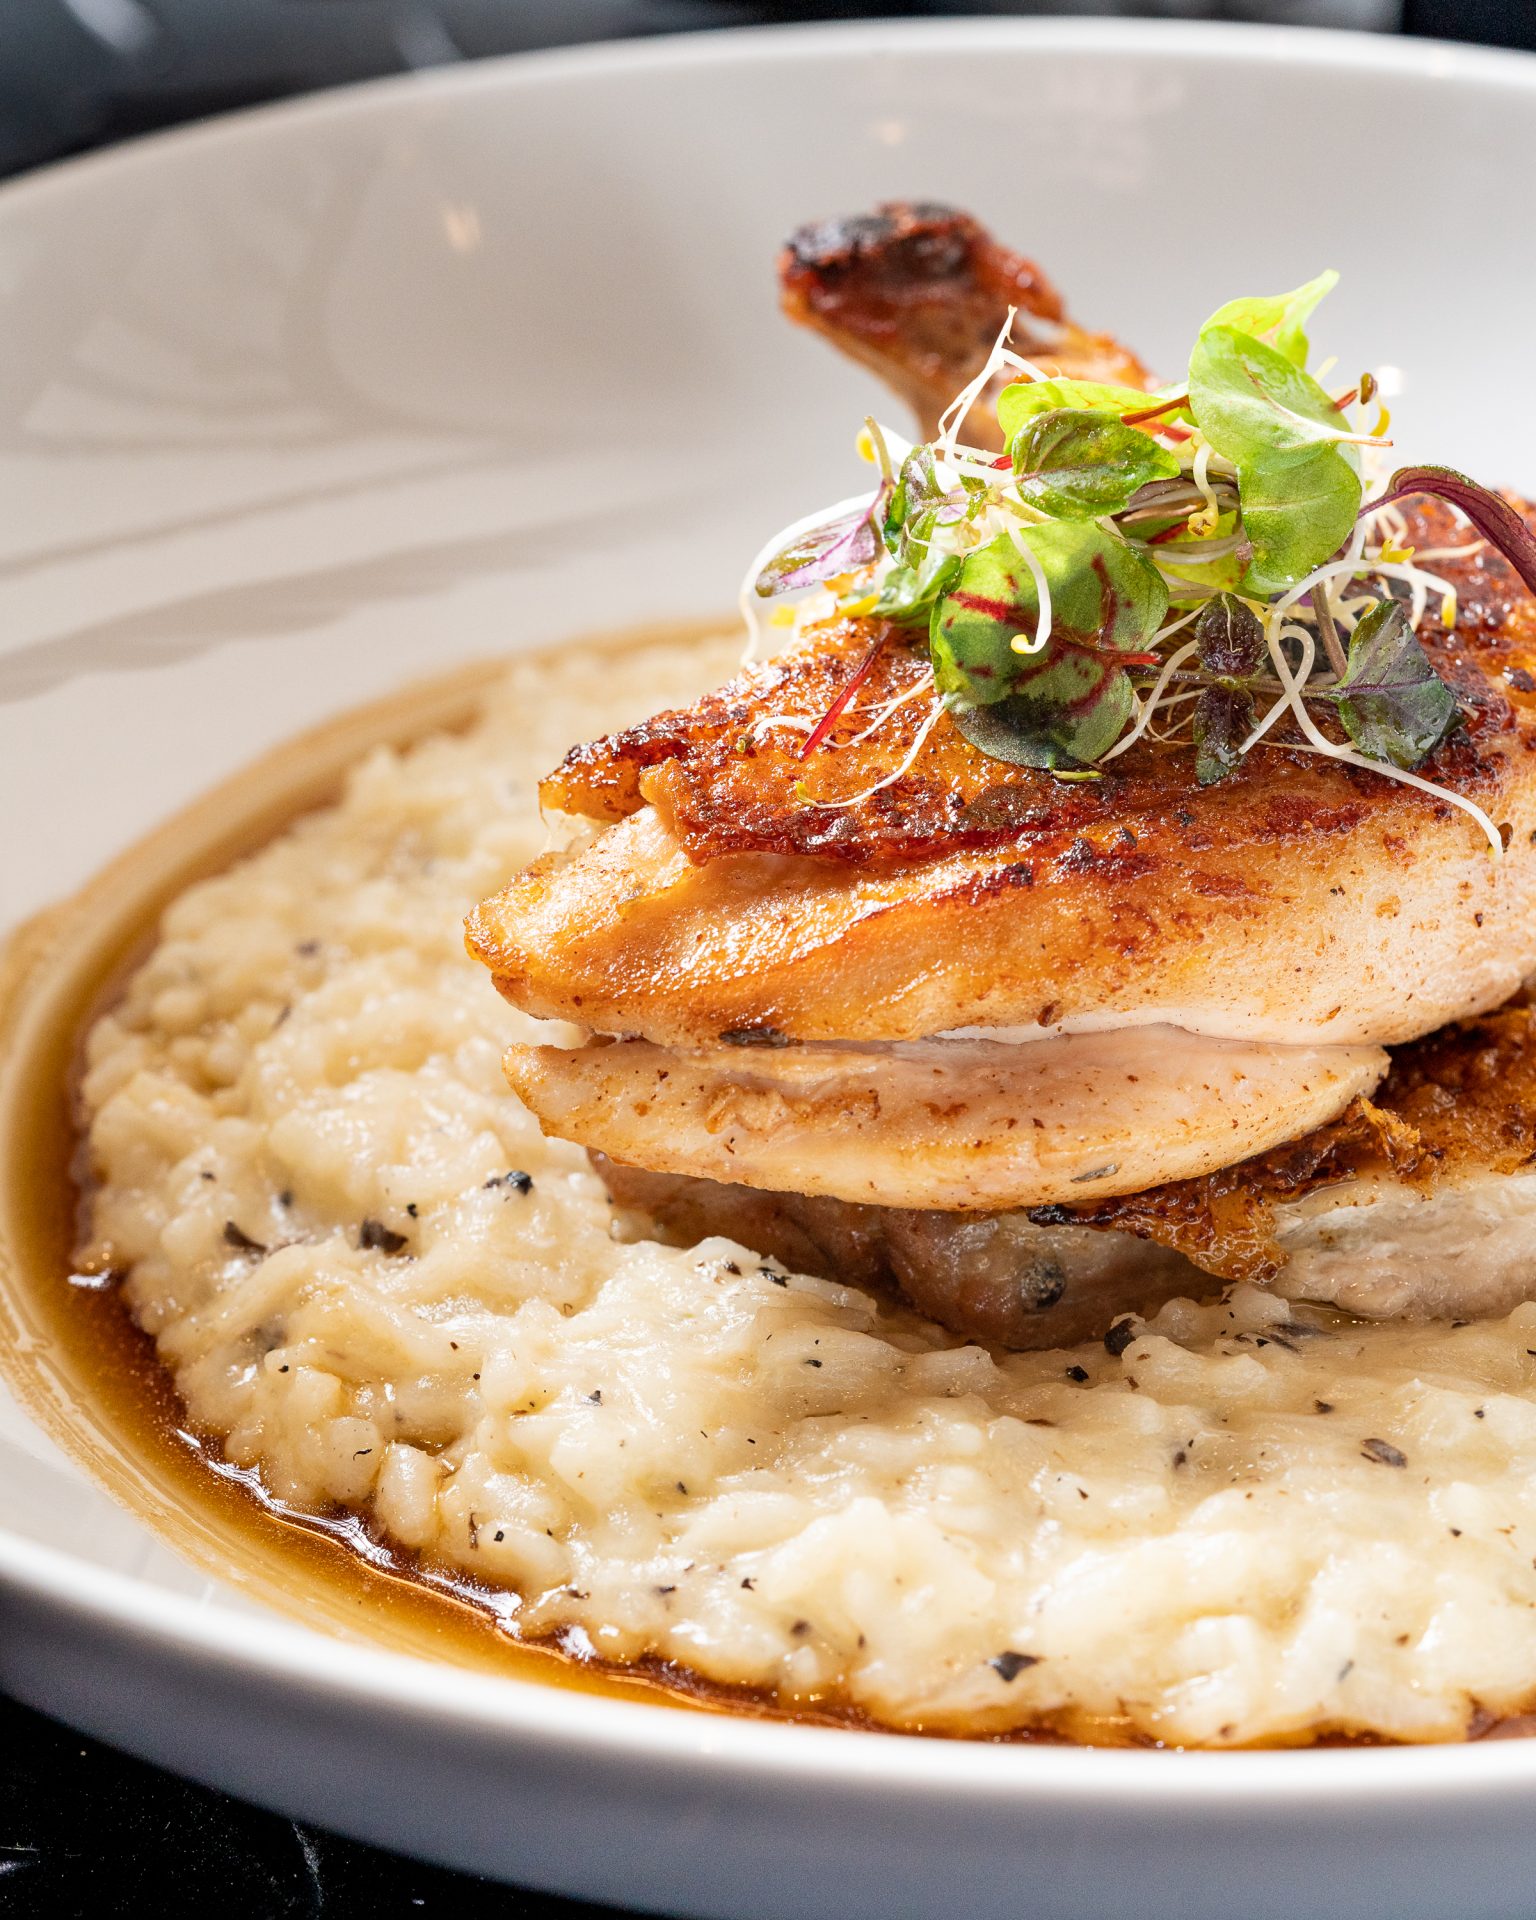 Fines Herbes Roast Baby Chicken with Truffle Risotto, Reggiano & Chicken Juices Dish Served at Raoul's Restaurant in Riyadh